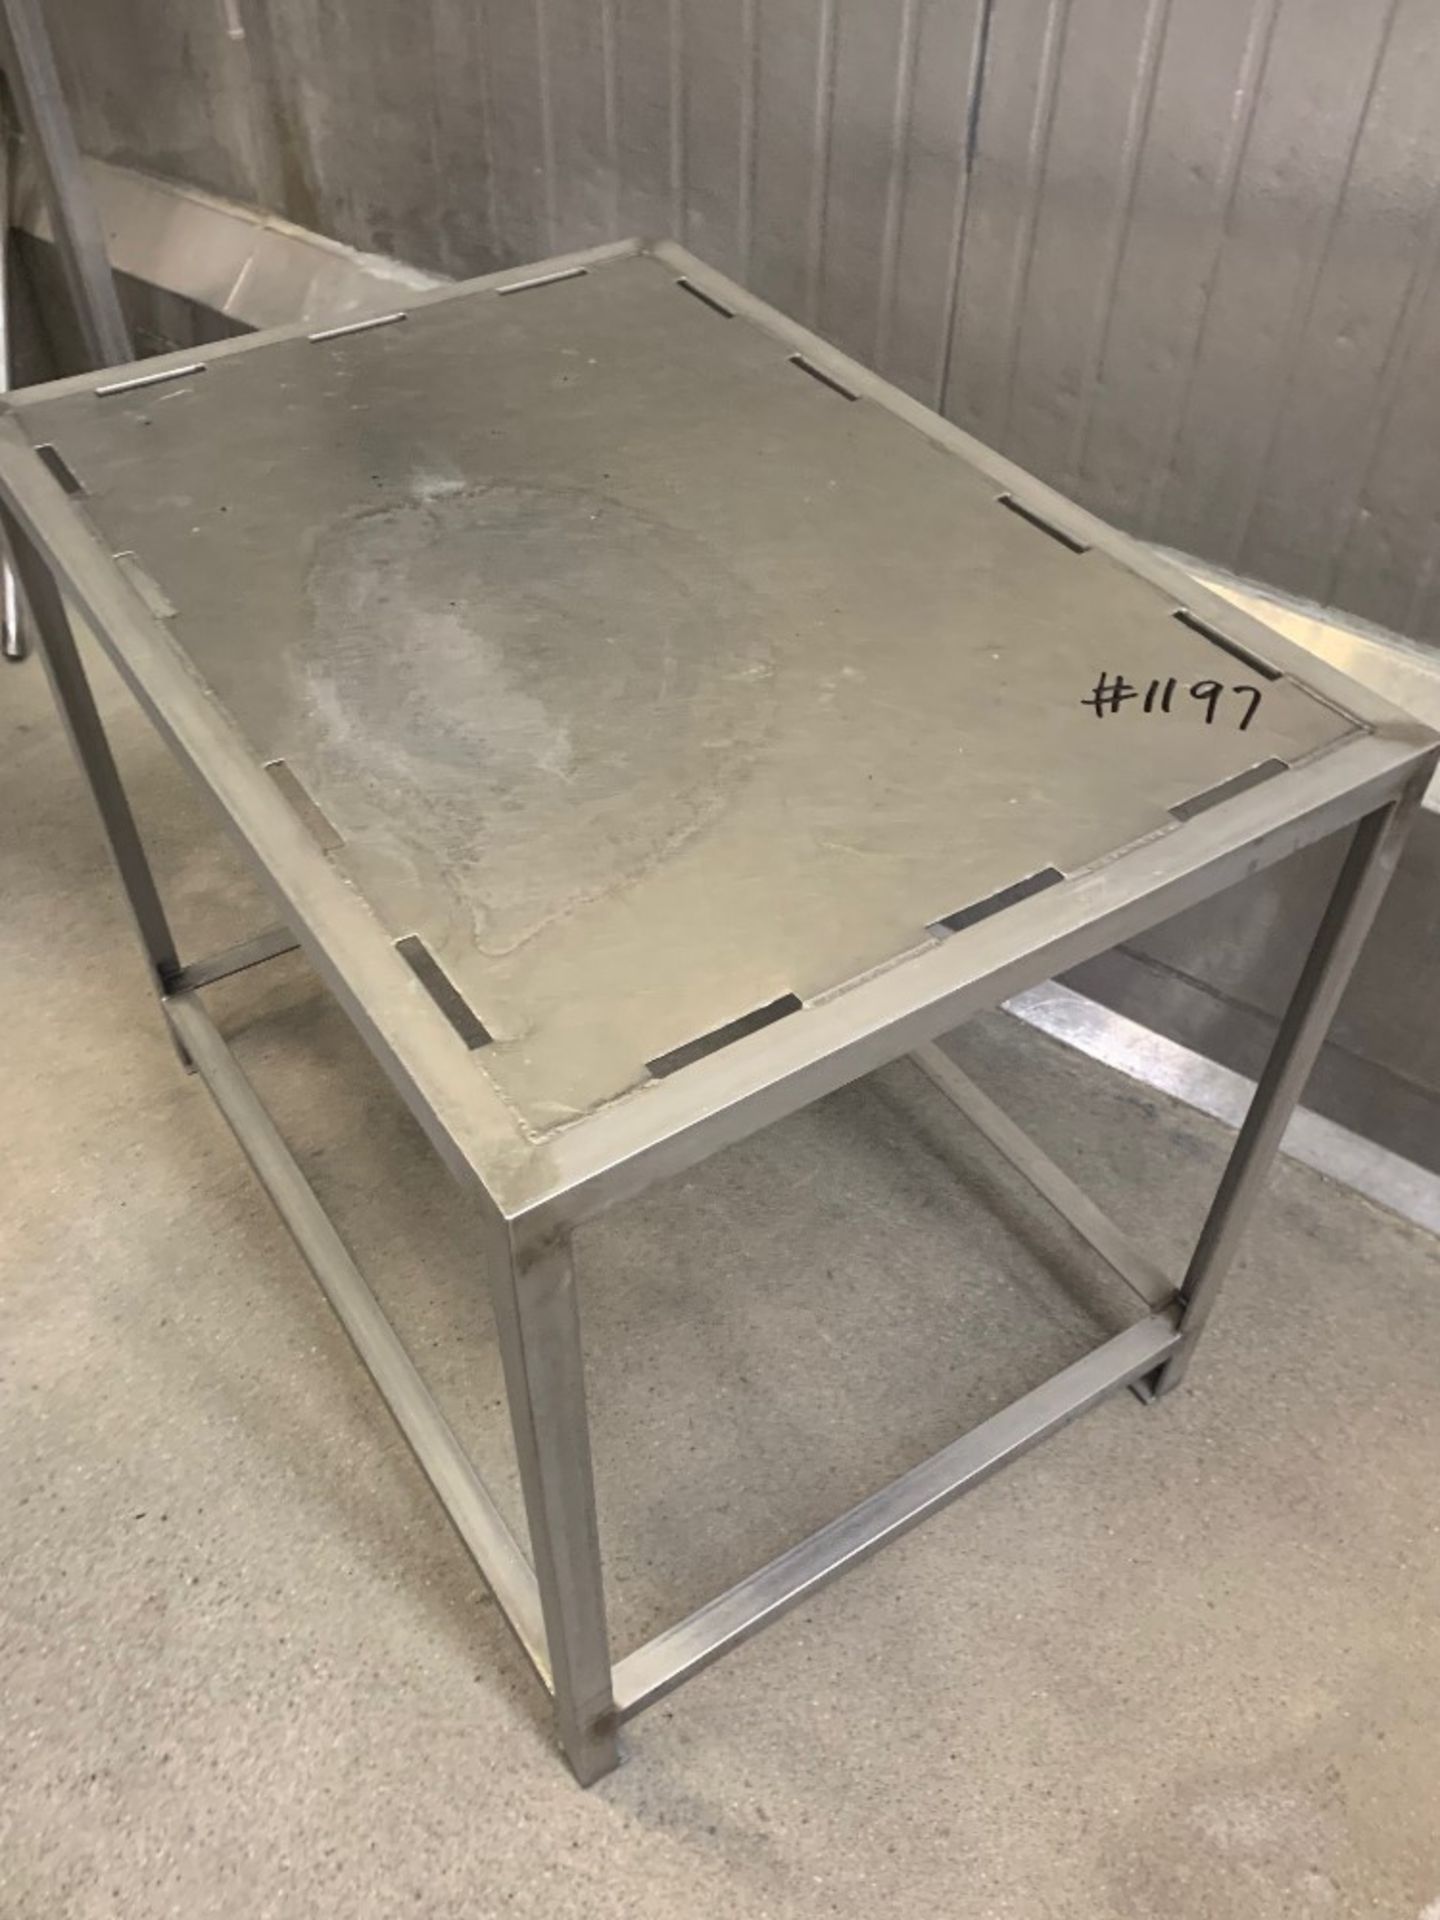 Lot Stainless Steel Parts Cart, (5) Stainless Steel Tables, Stainless Steel Cabinet, 6' Long - Image 4 of 9